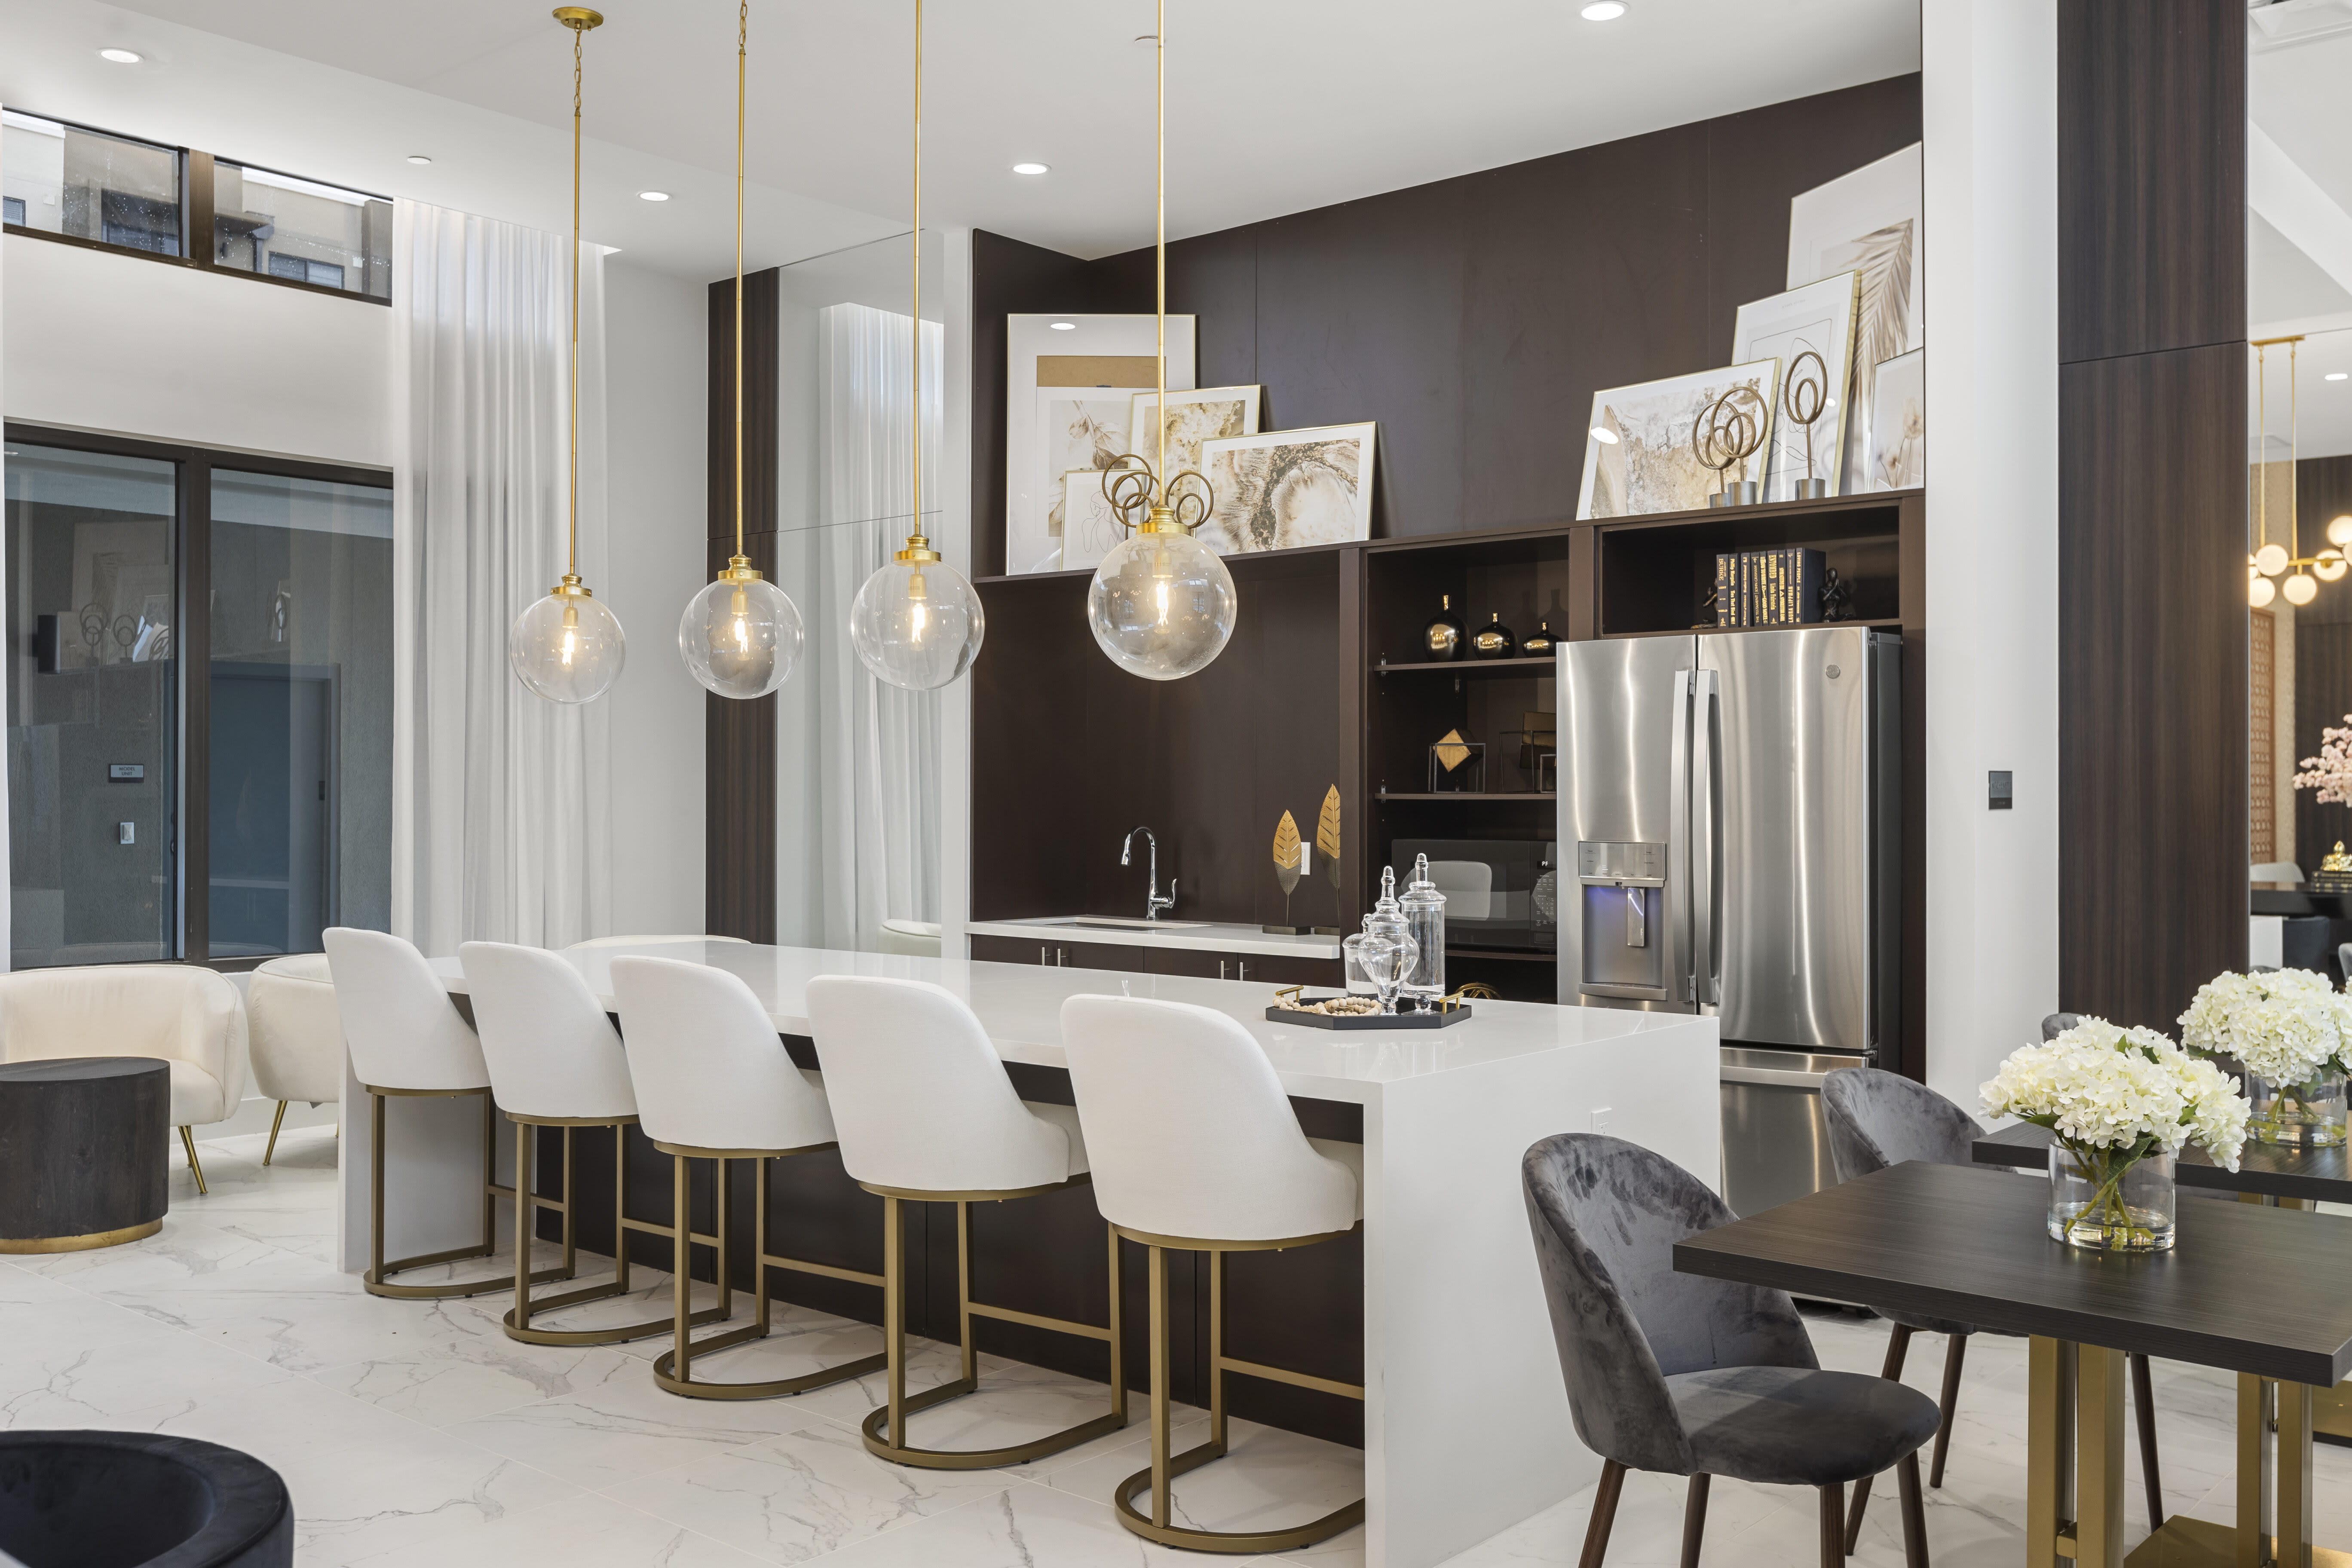 Upscale clubhouse featuring modern furnishings, high-end lighting, and comfortable seating at Pine Ridge, West Palm Beach, Florida